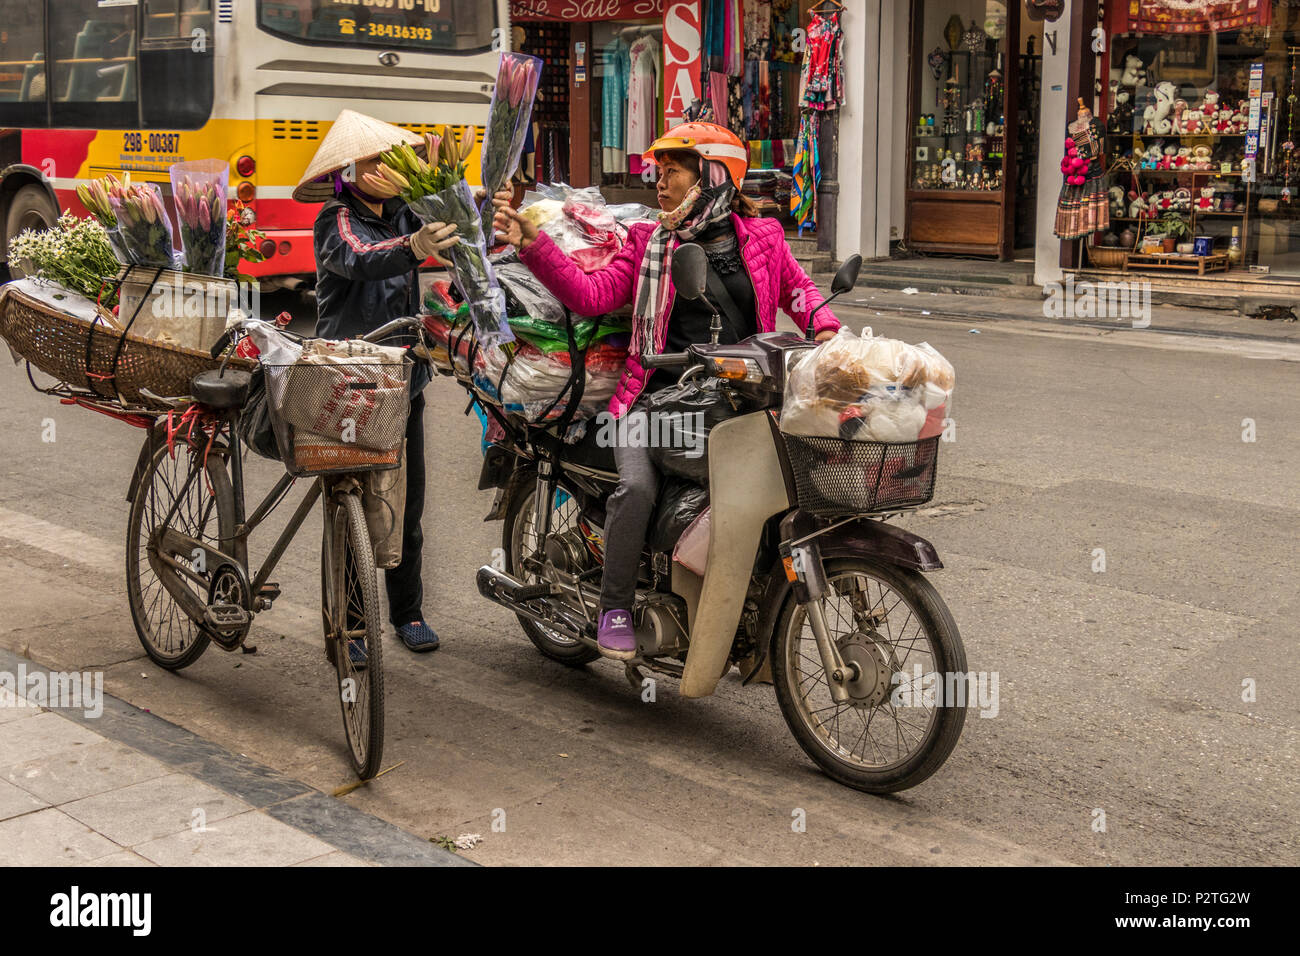 Vendors one foot,motorcyce and cycle in Hanoi Vietnam Stock Photo